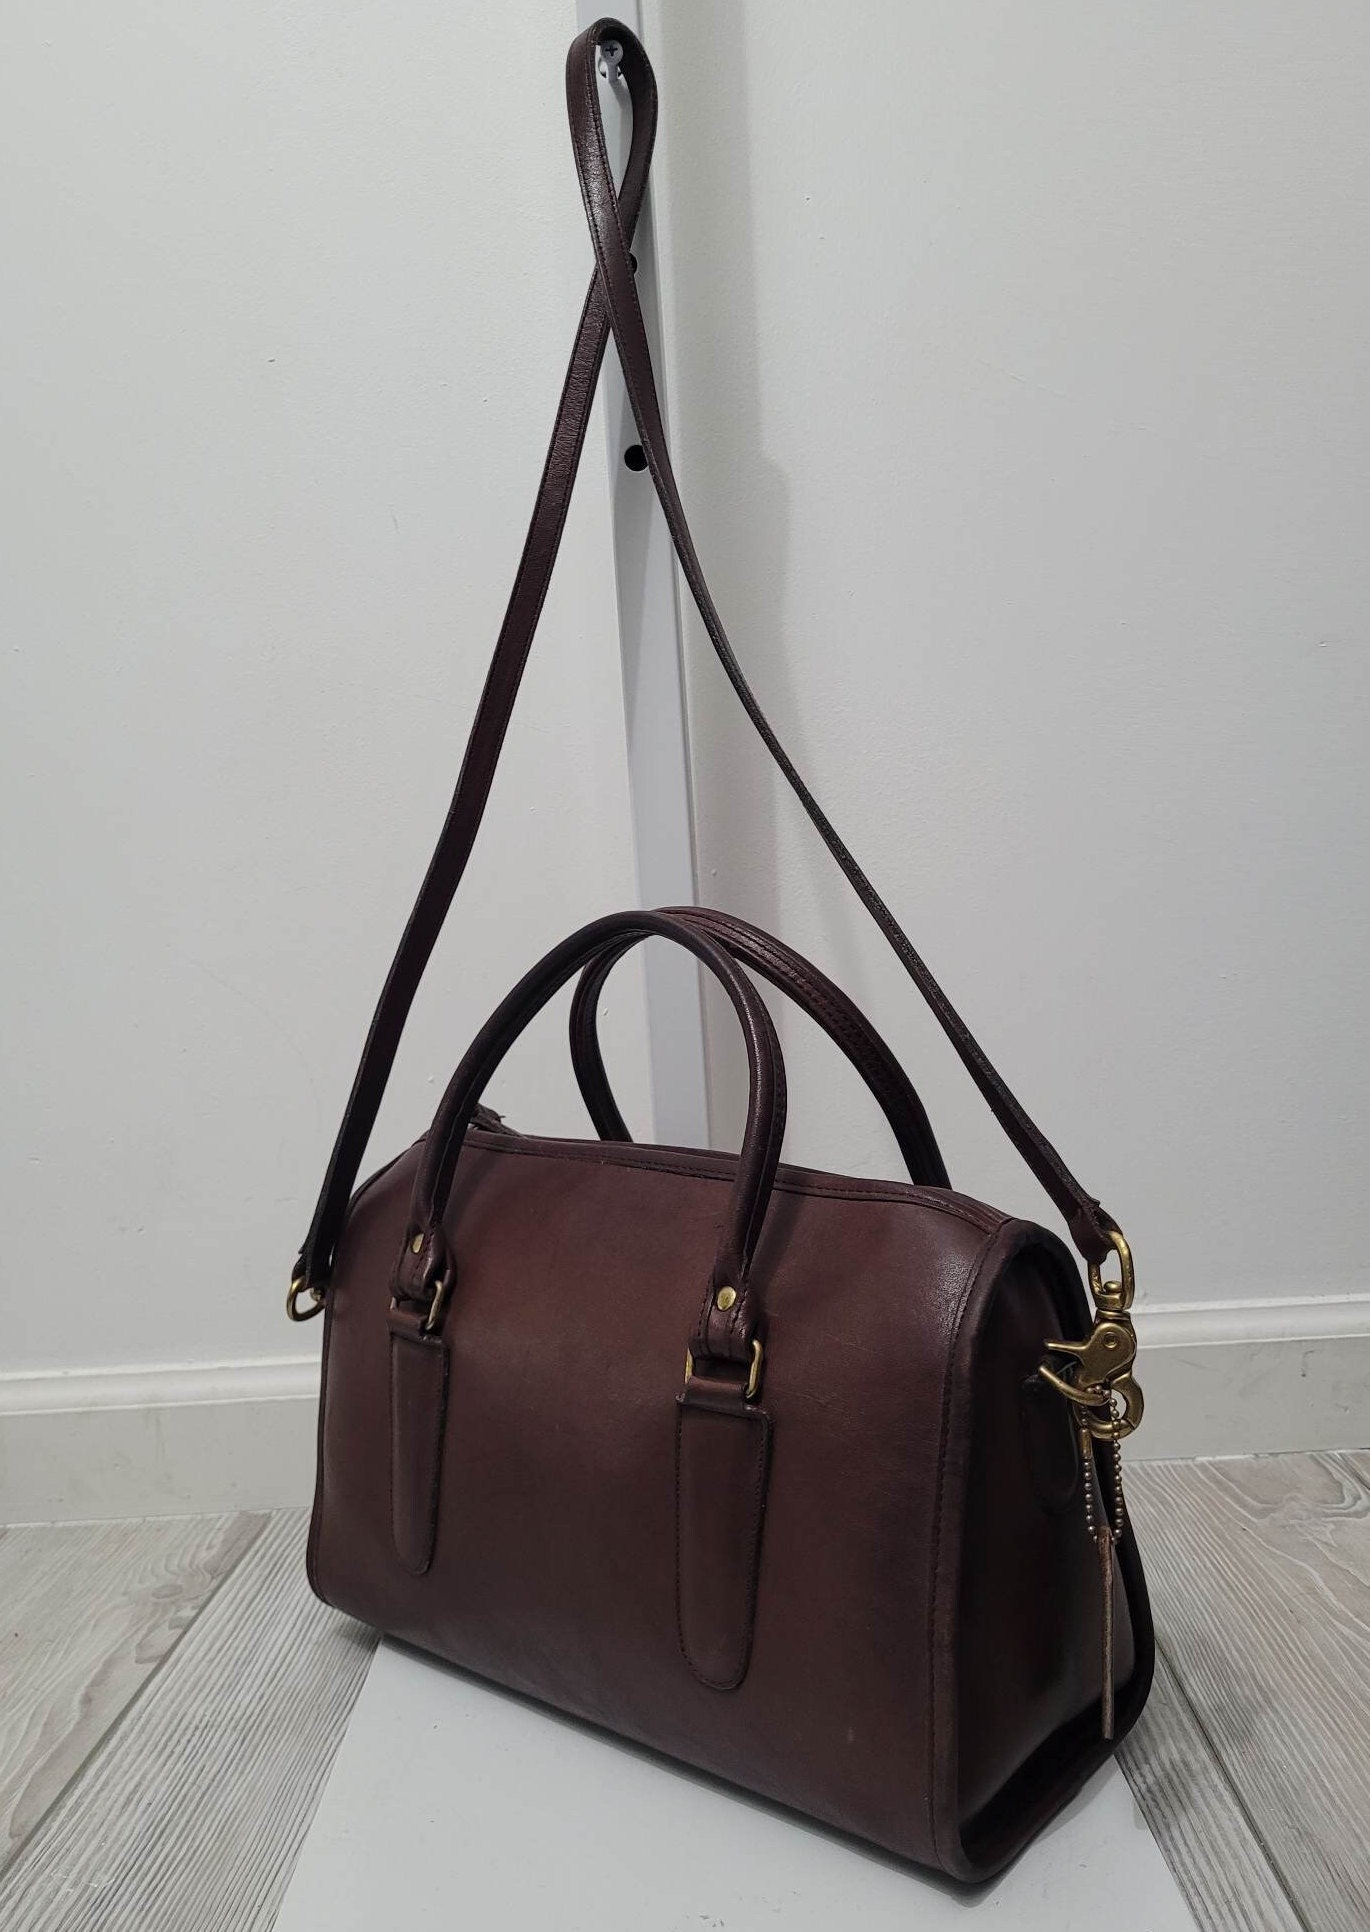 Preowned Coach Madison Satchel #17995 Brown Leather